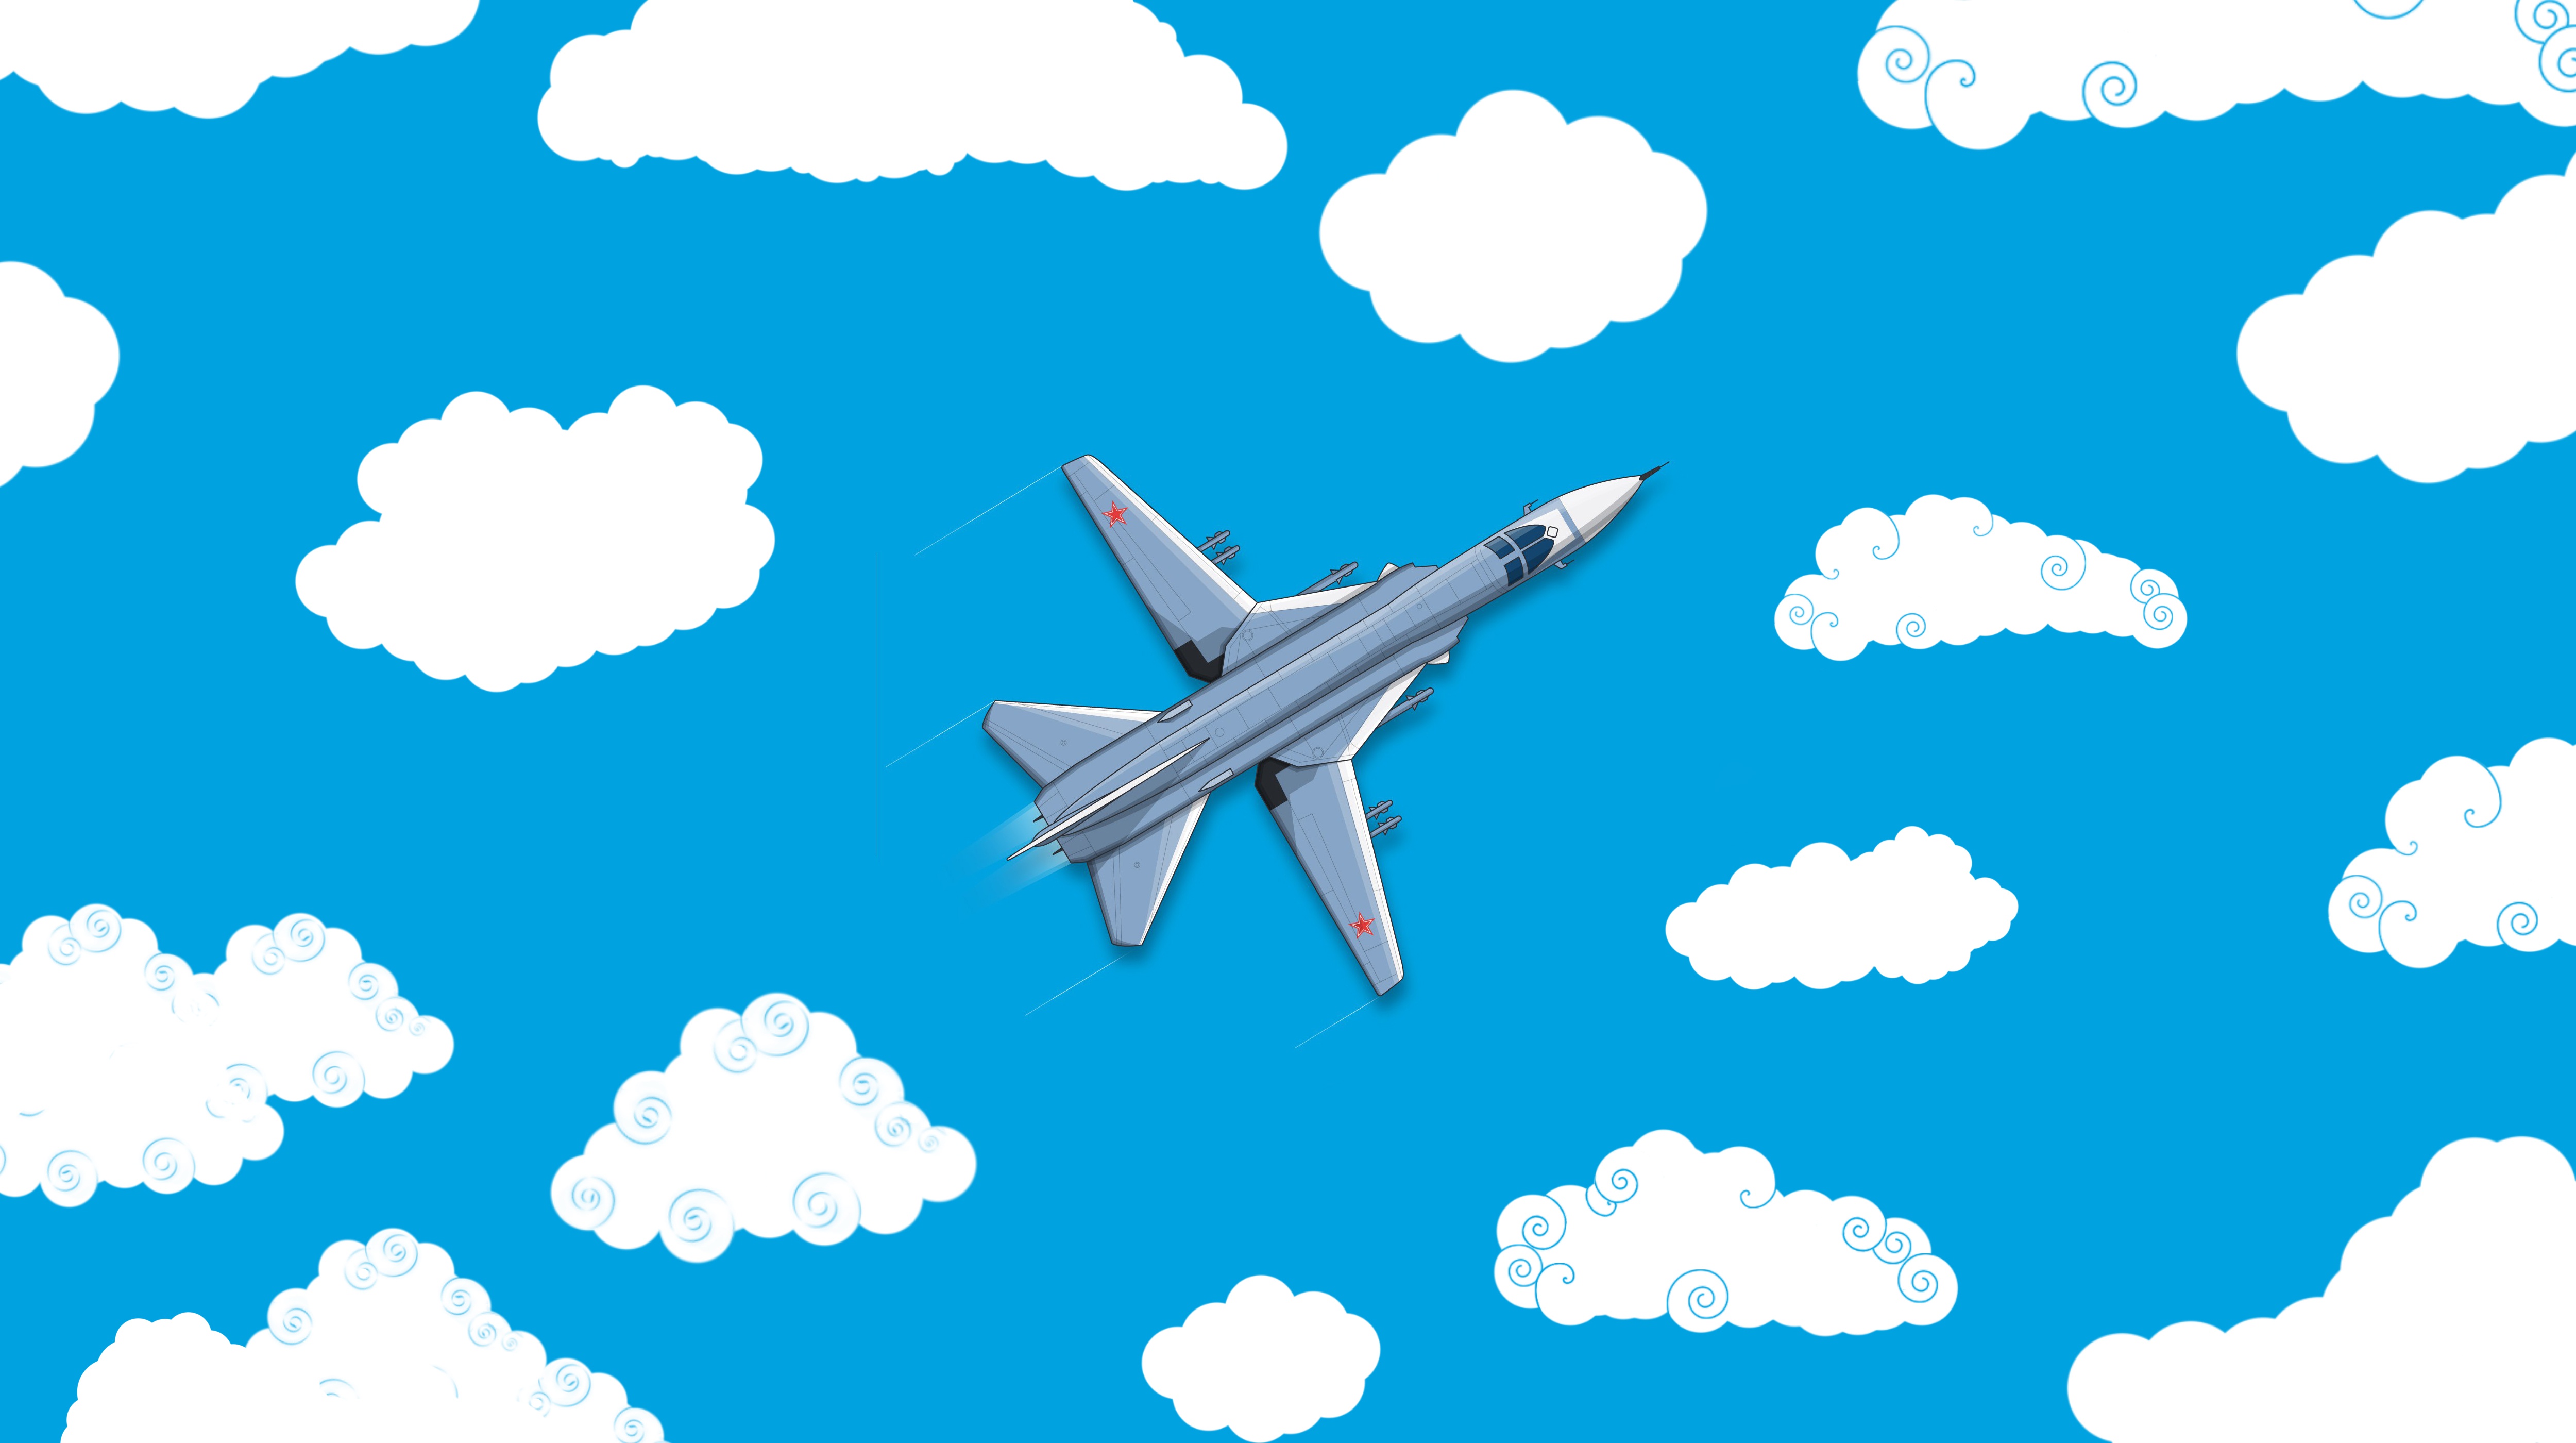 General 5000x2800 artwork Sukhoi Su-24 aircraft clouds military military aircraft Sukhoi sky airplane simple background jets Bomber Russian Air Force red star